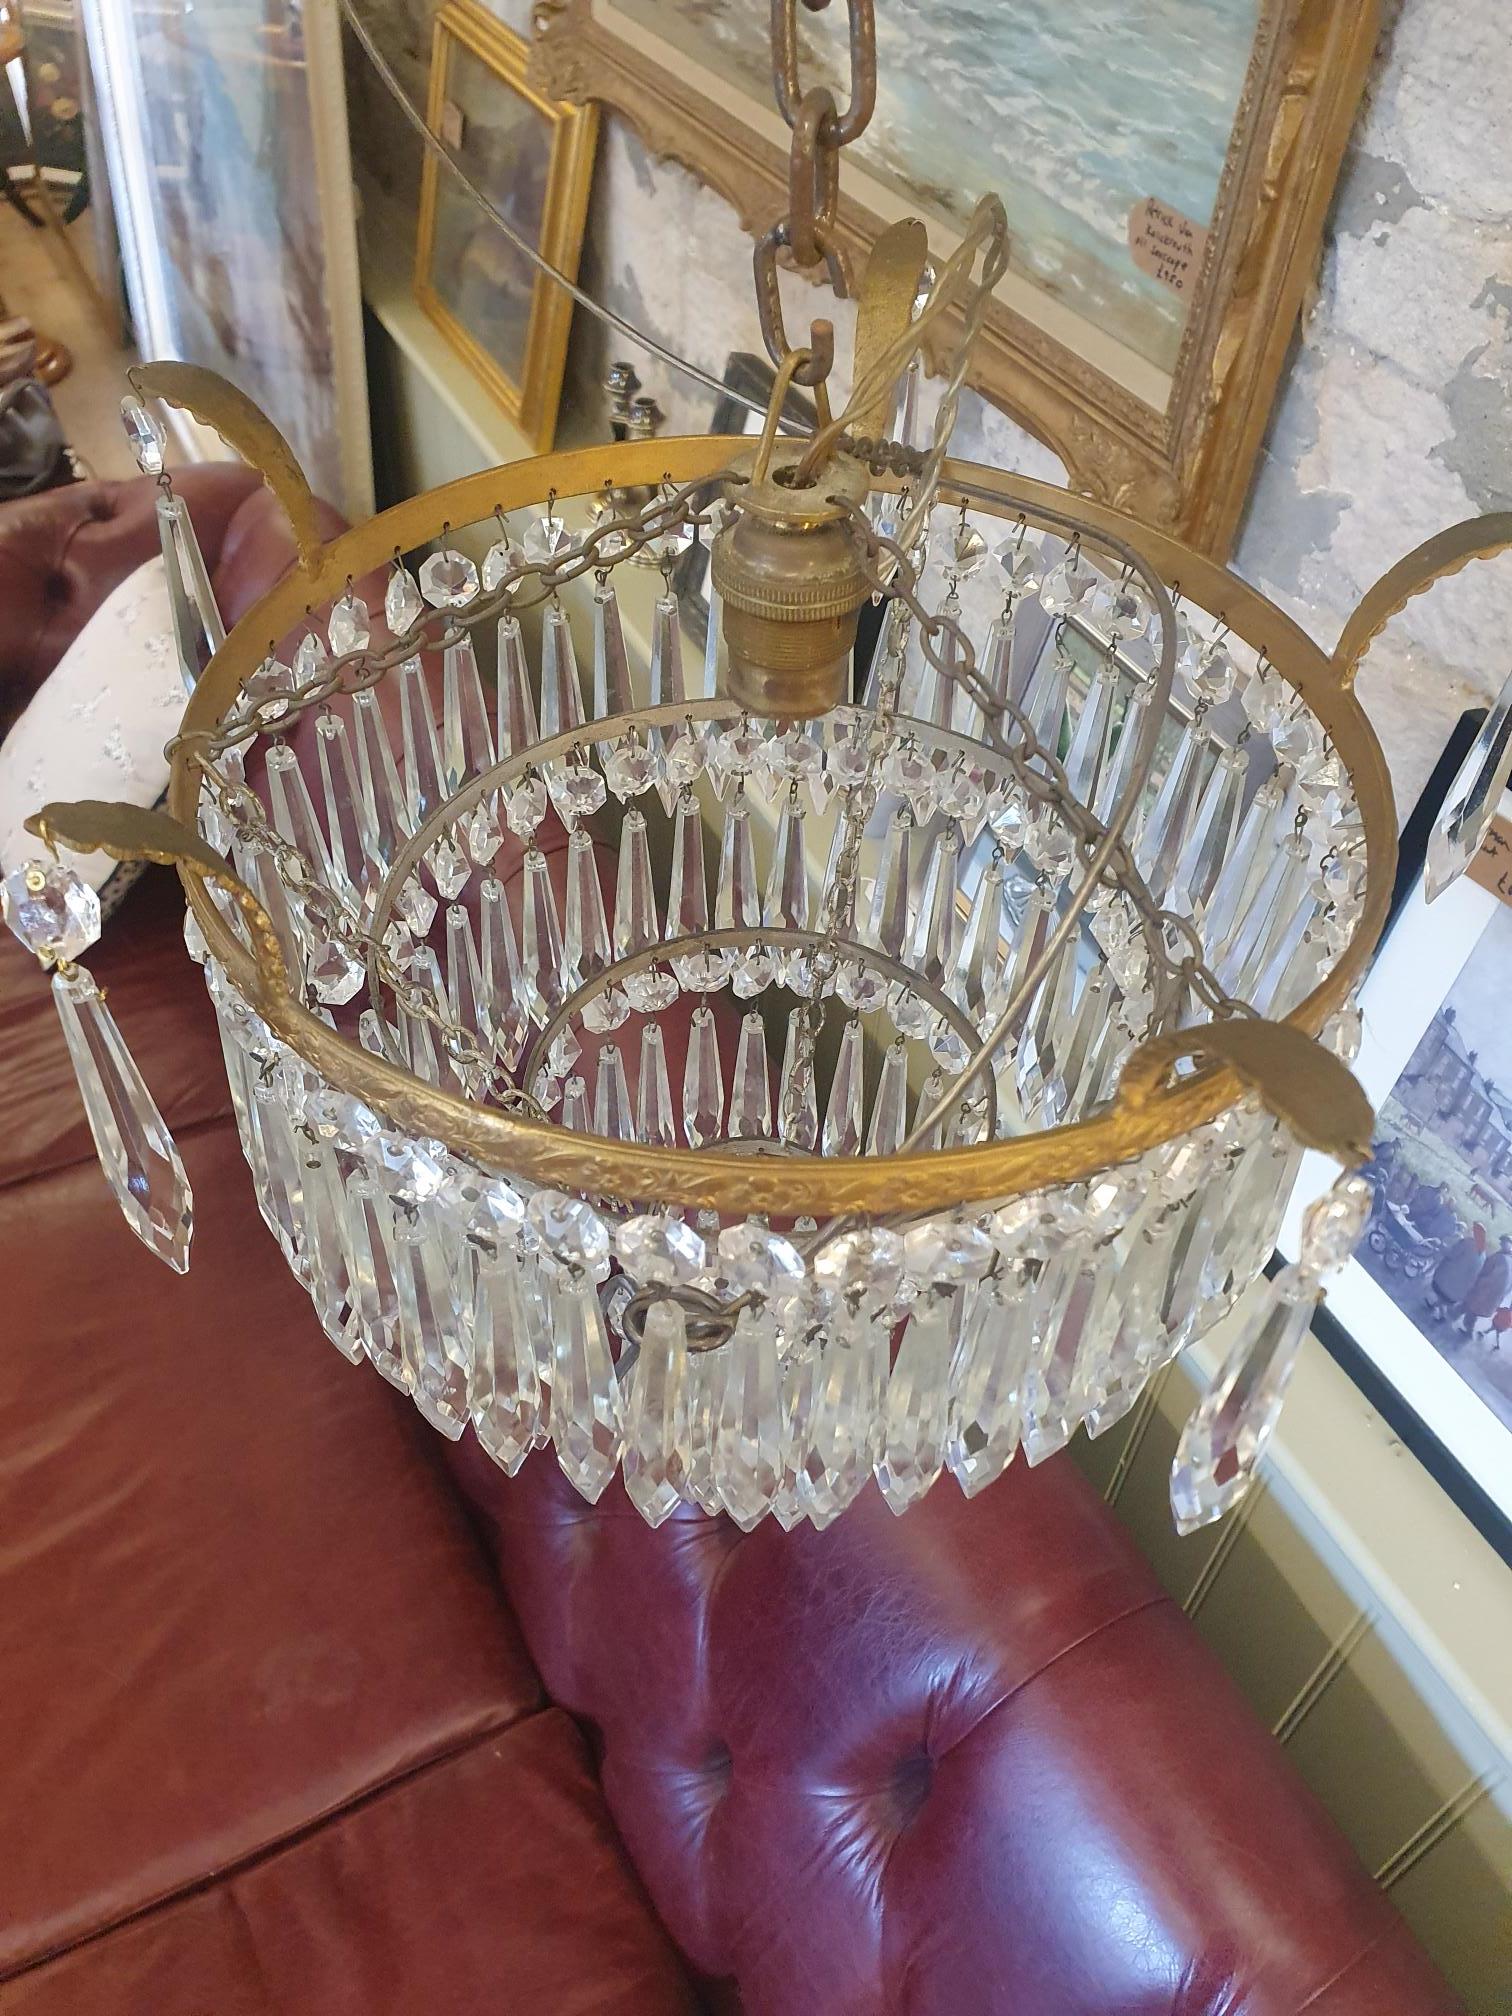 Edwardian Four-Tier Crystal Waterfall Chandelier with Classic Gilt Frame and Faceted Icicle Drops - Image 3 of 4